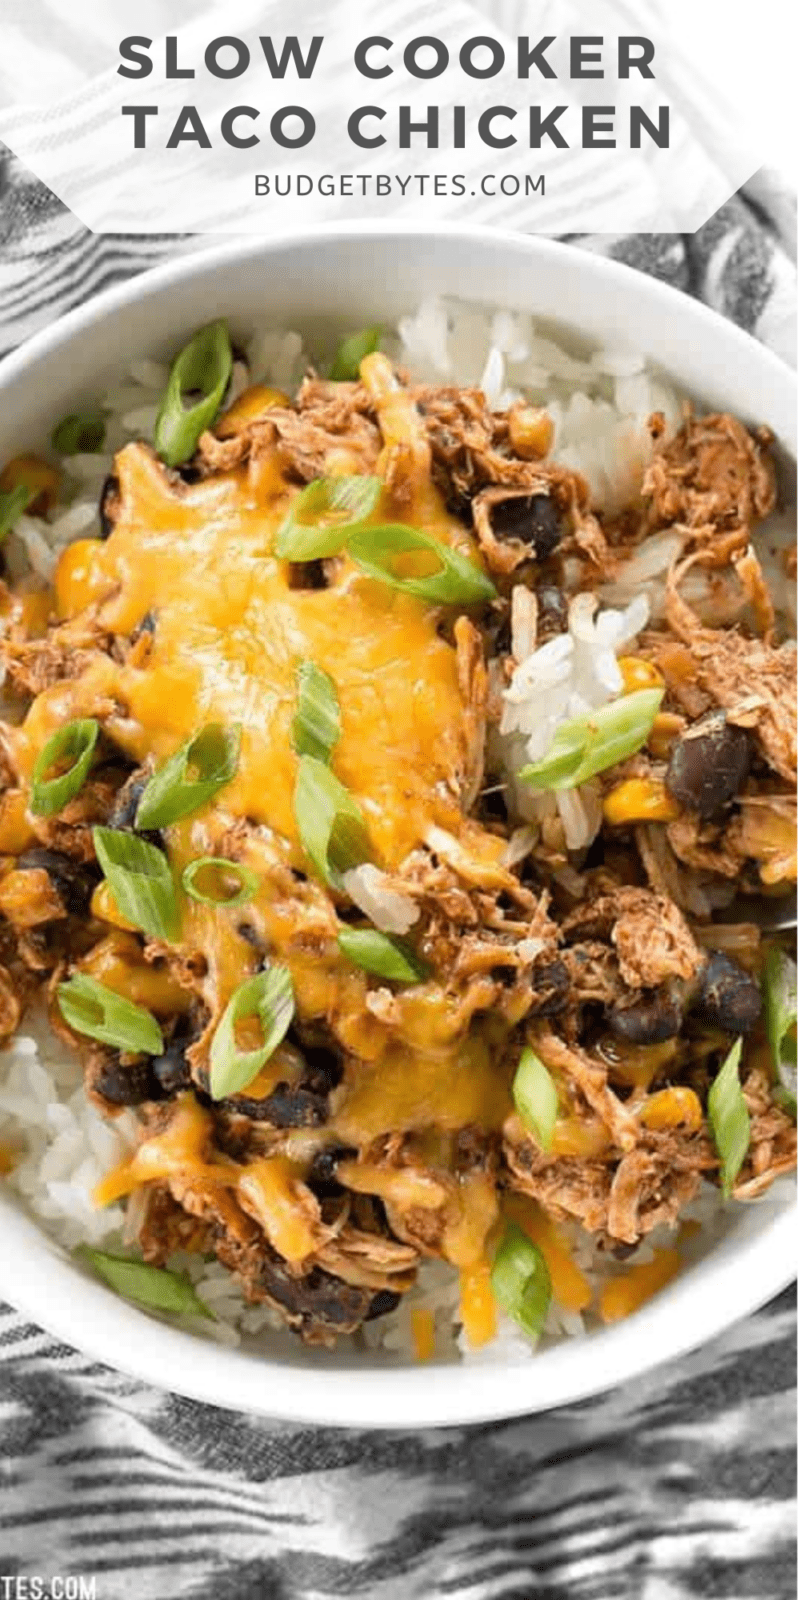 https://www.budgetbytes.com/wp-content/uploads/2011/07/Slow-Cooker-Taco-Chickenn-800x1600.png